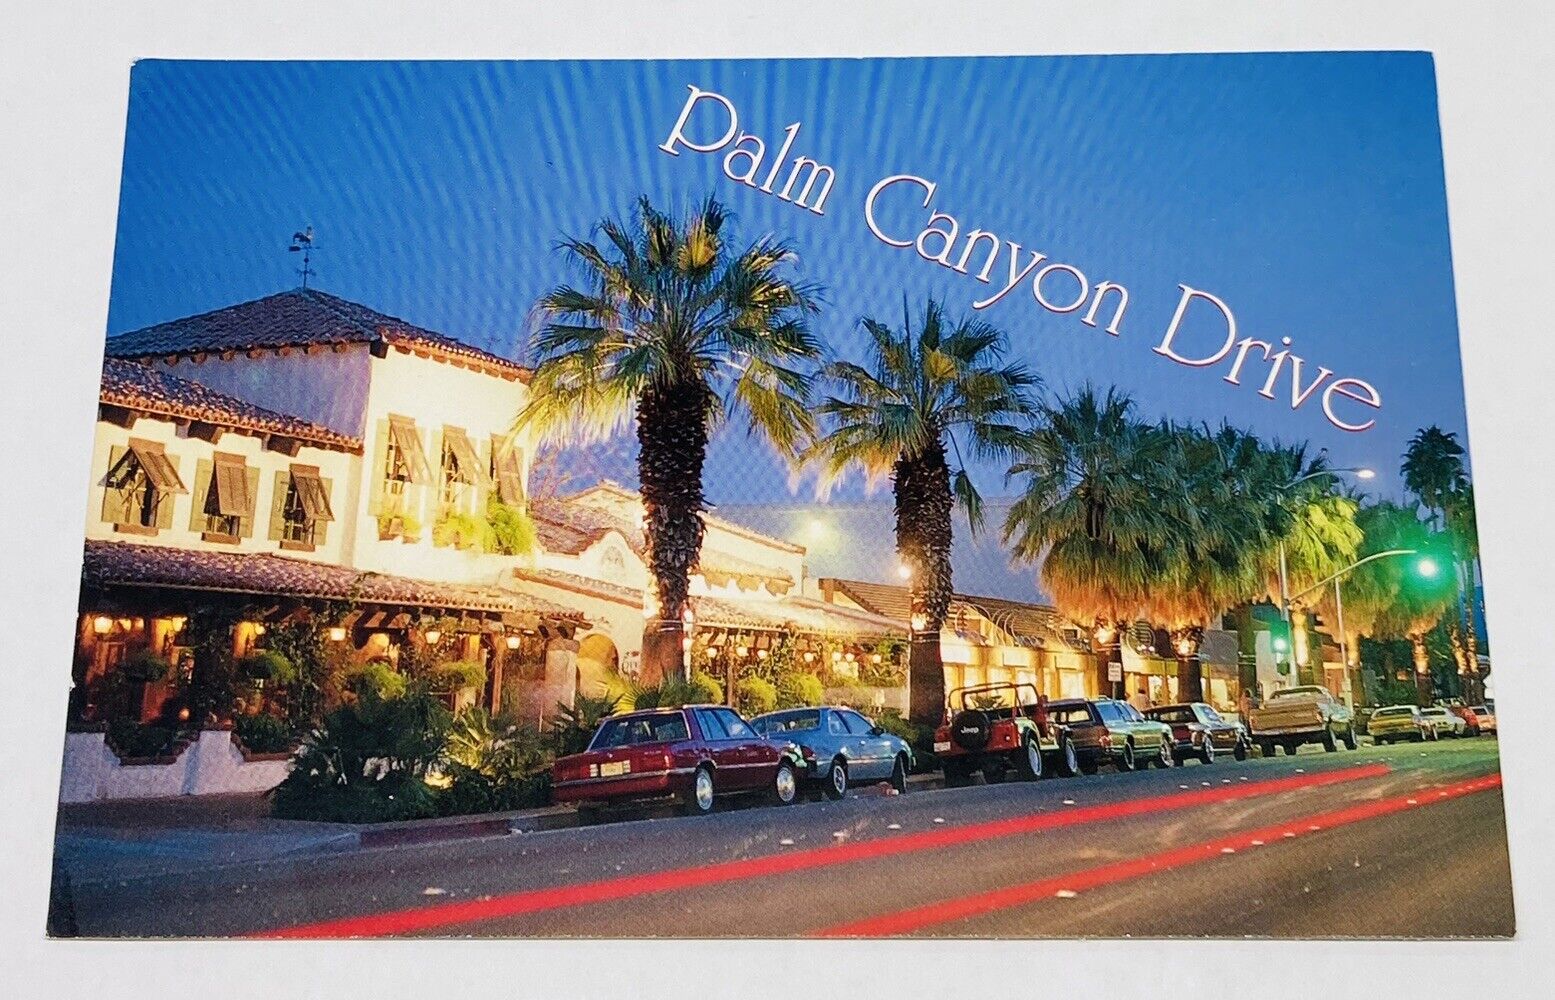 Vintage Postcard Picturesque Palm Canyon Drive At Night Cruise Strip P2